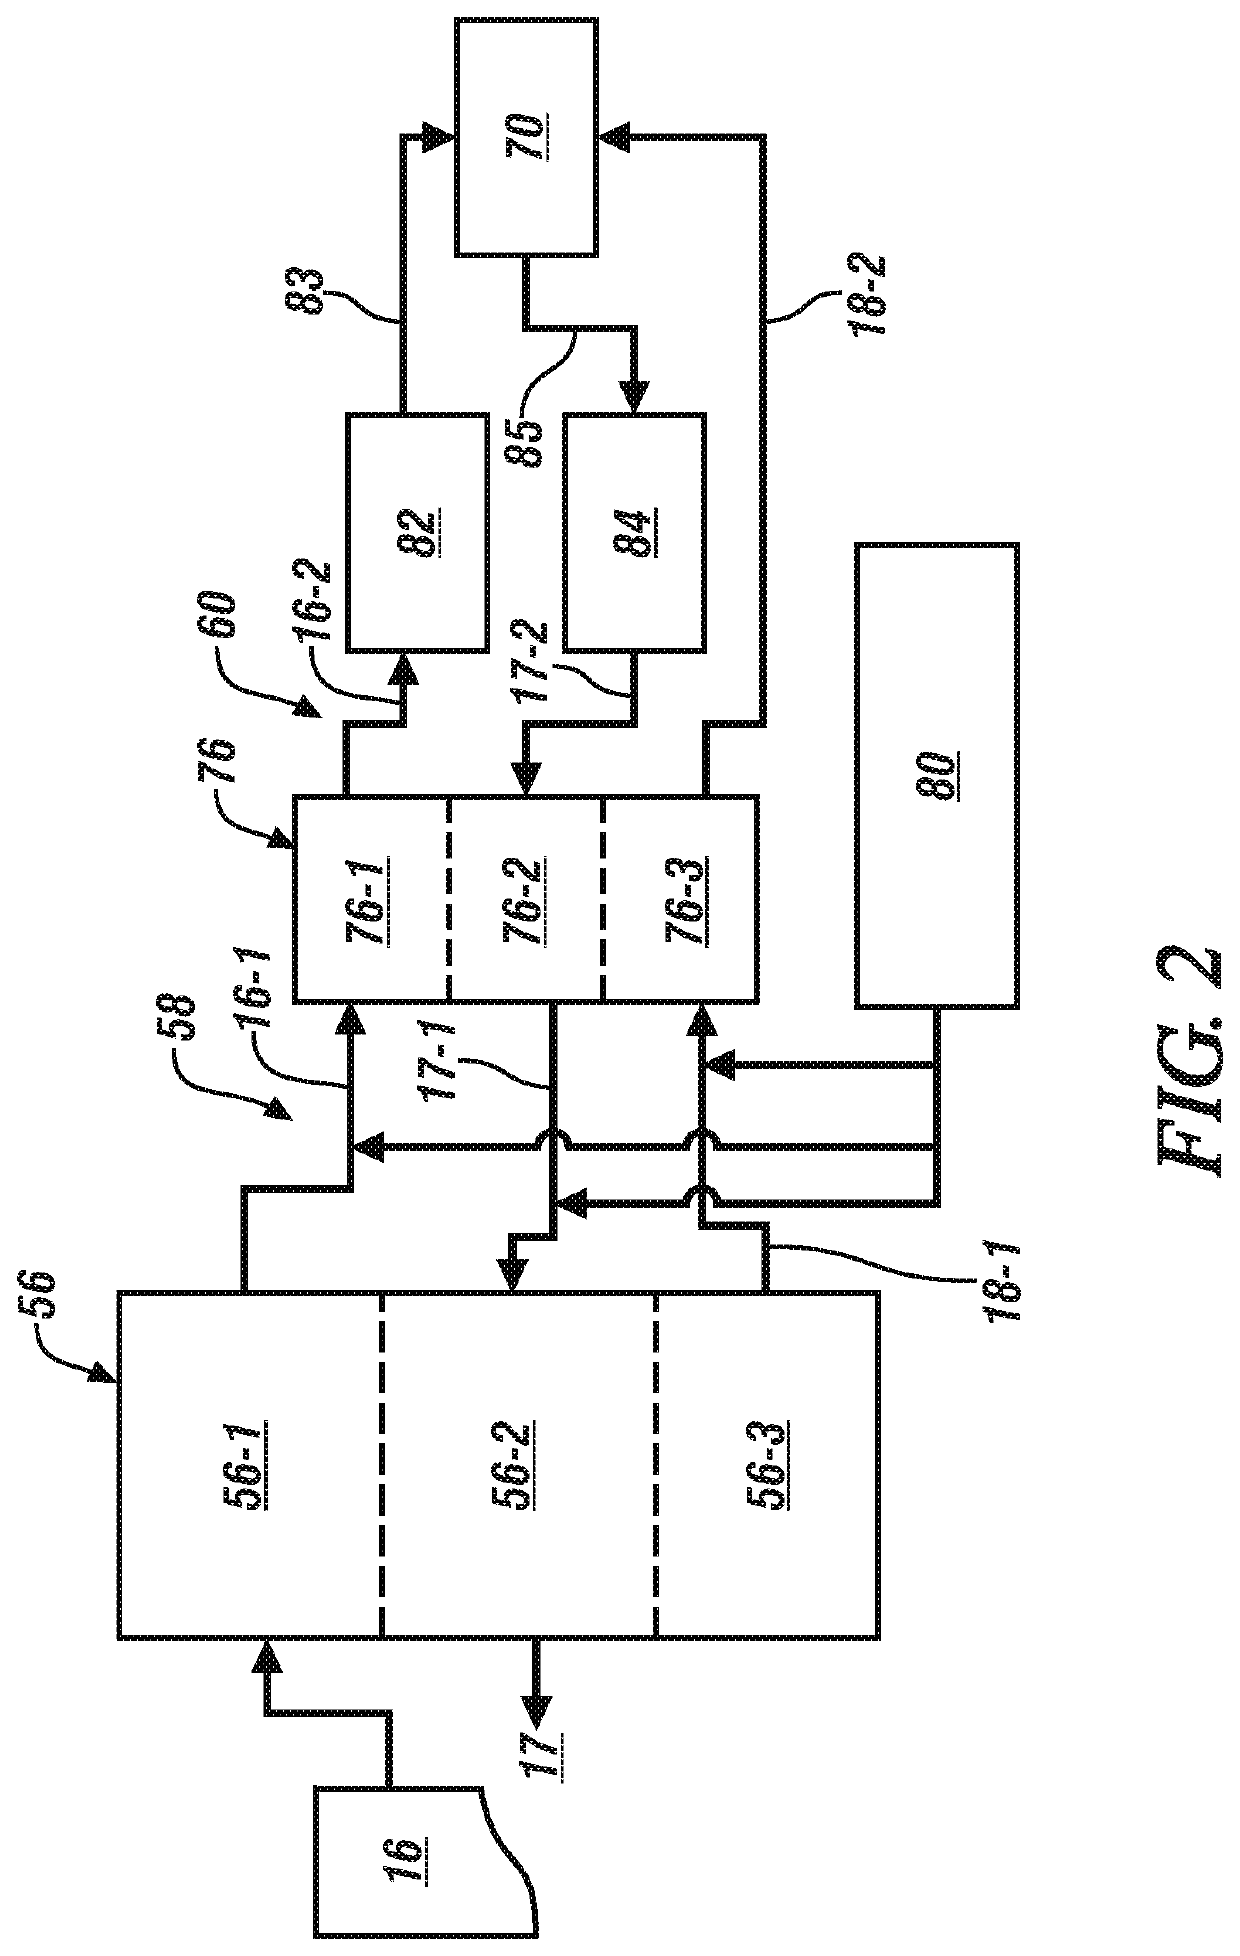 Method and apparatus for memory access management for data processing